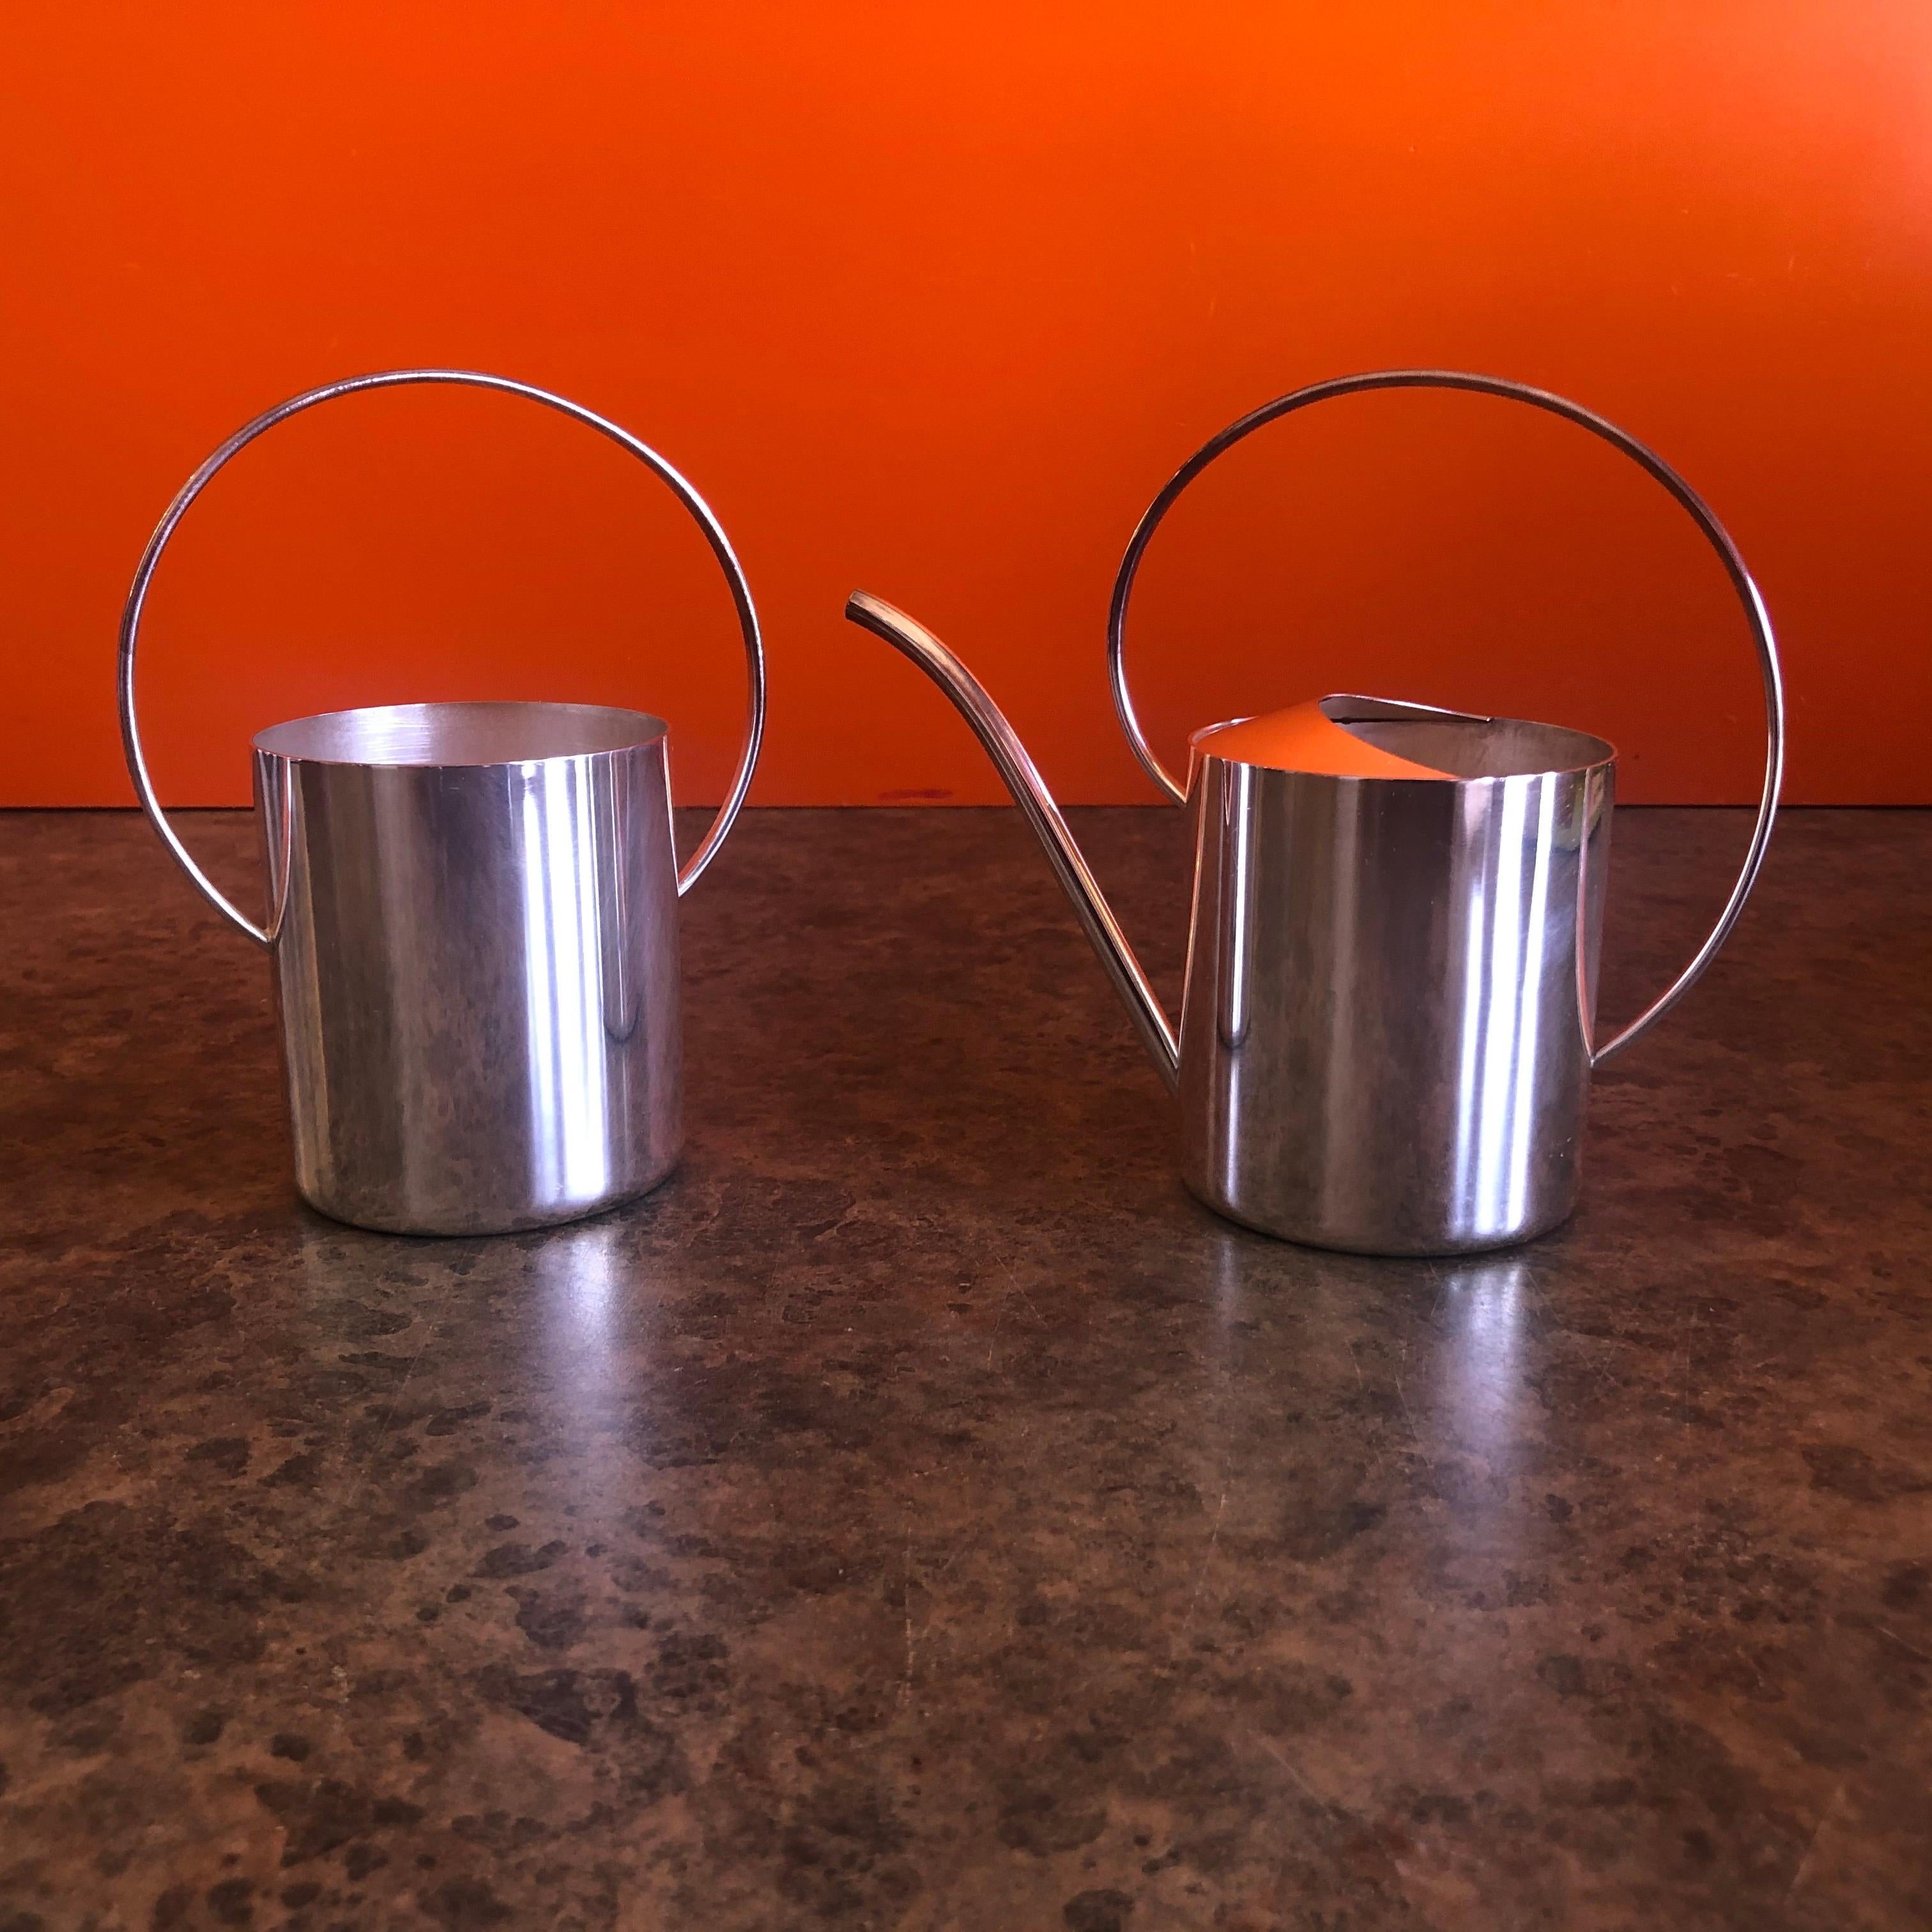 Striking Danish modern silver plate cream and sugar set by Eleanor Claire, circa 1960s. The highly crafted two-piece set is in the form of a watering can and garden pail. Very cool! The pieces are marked 